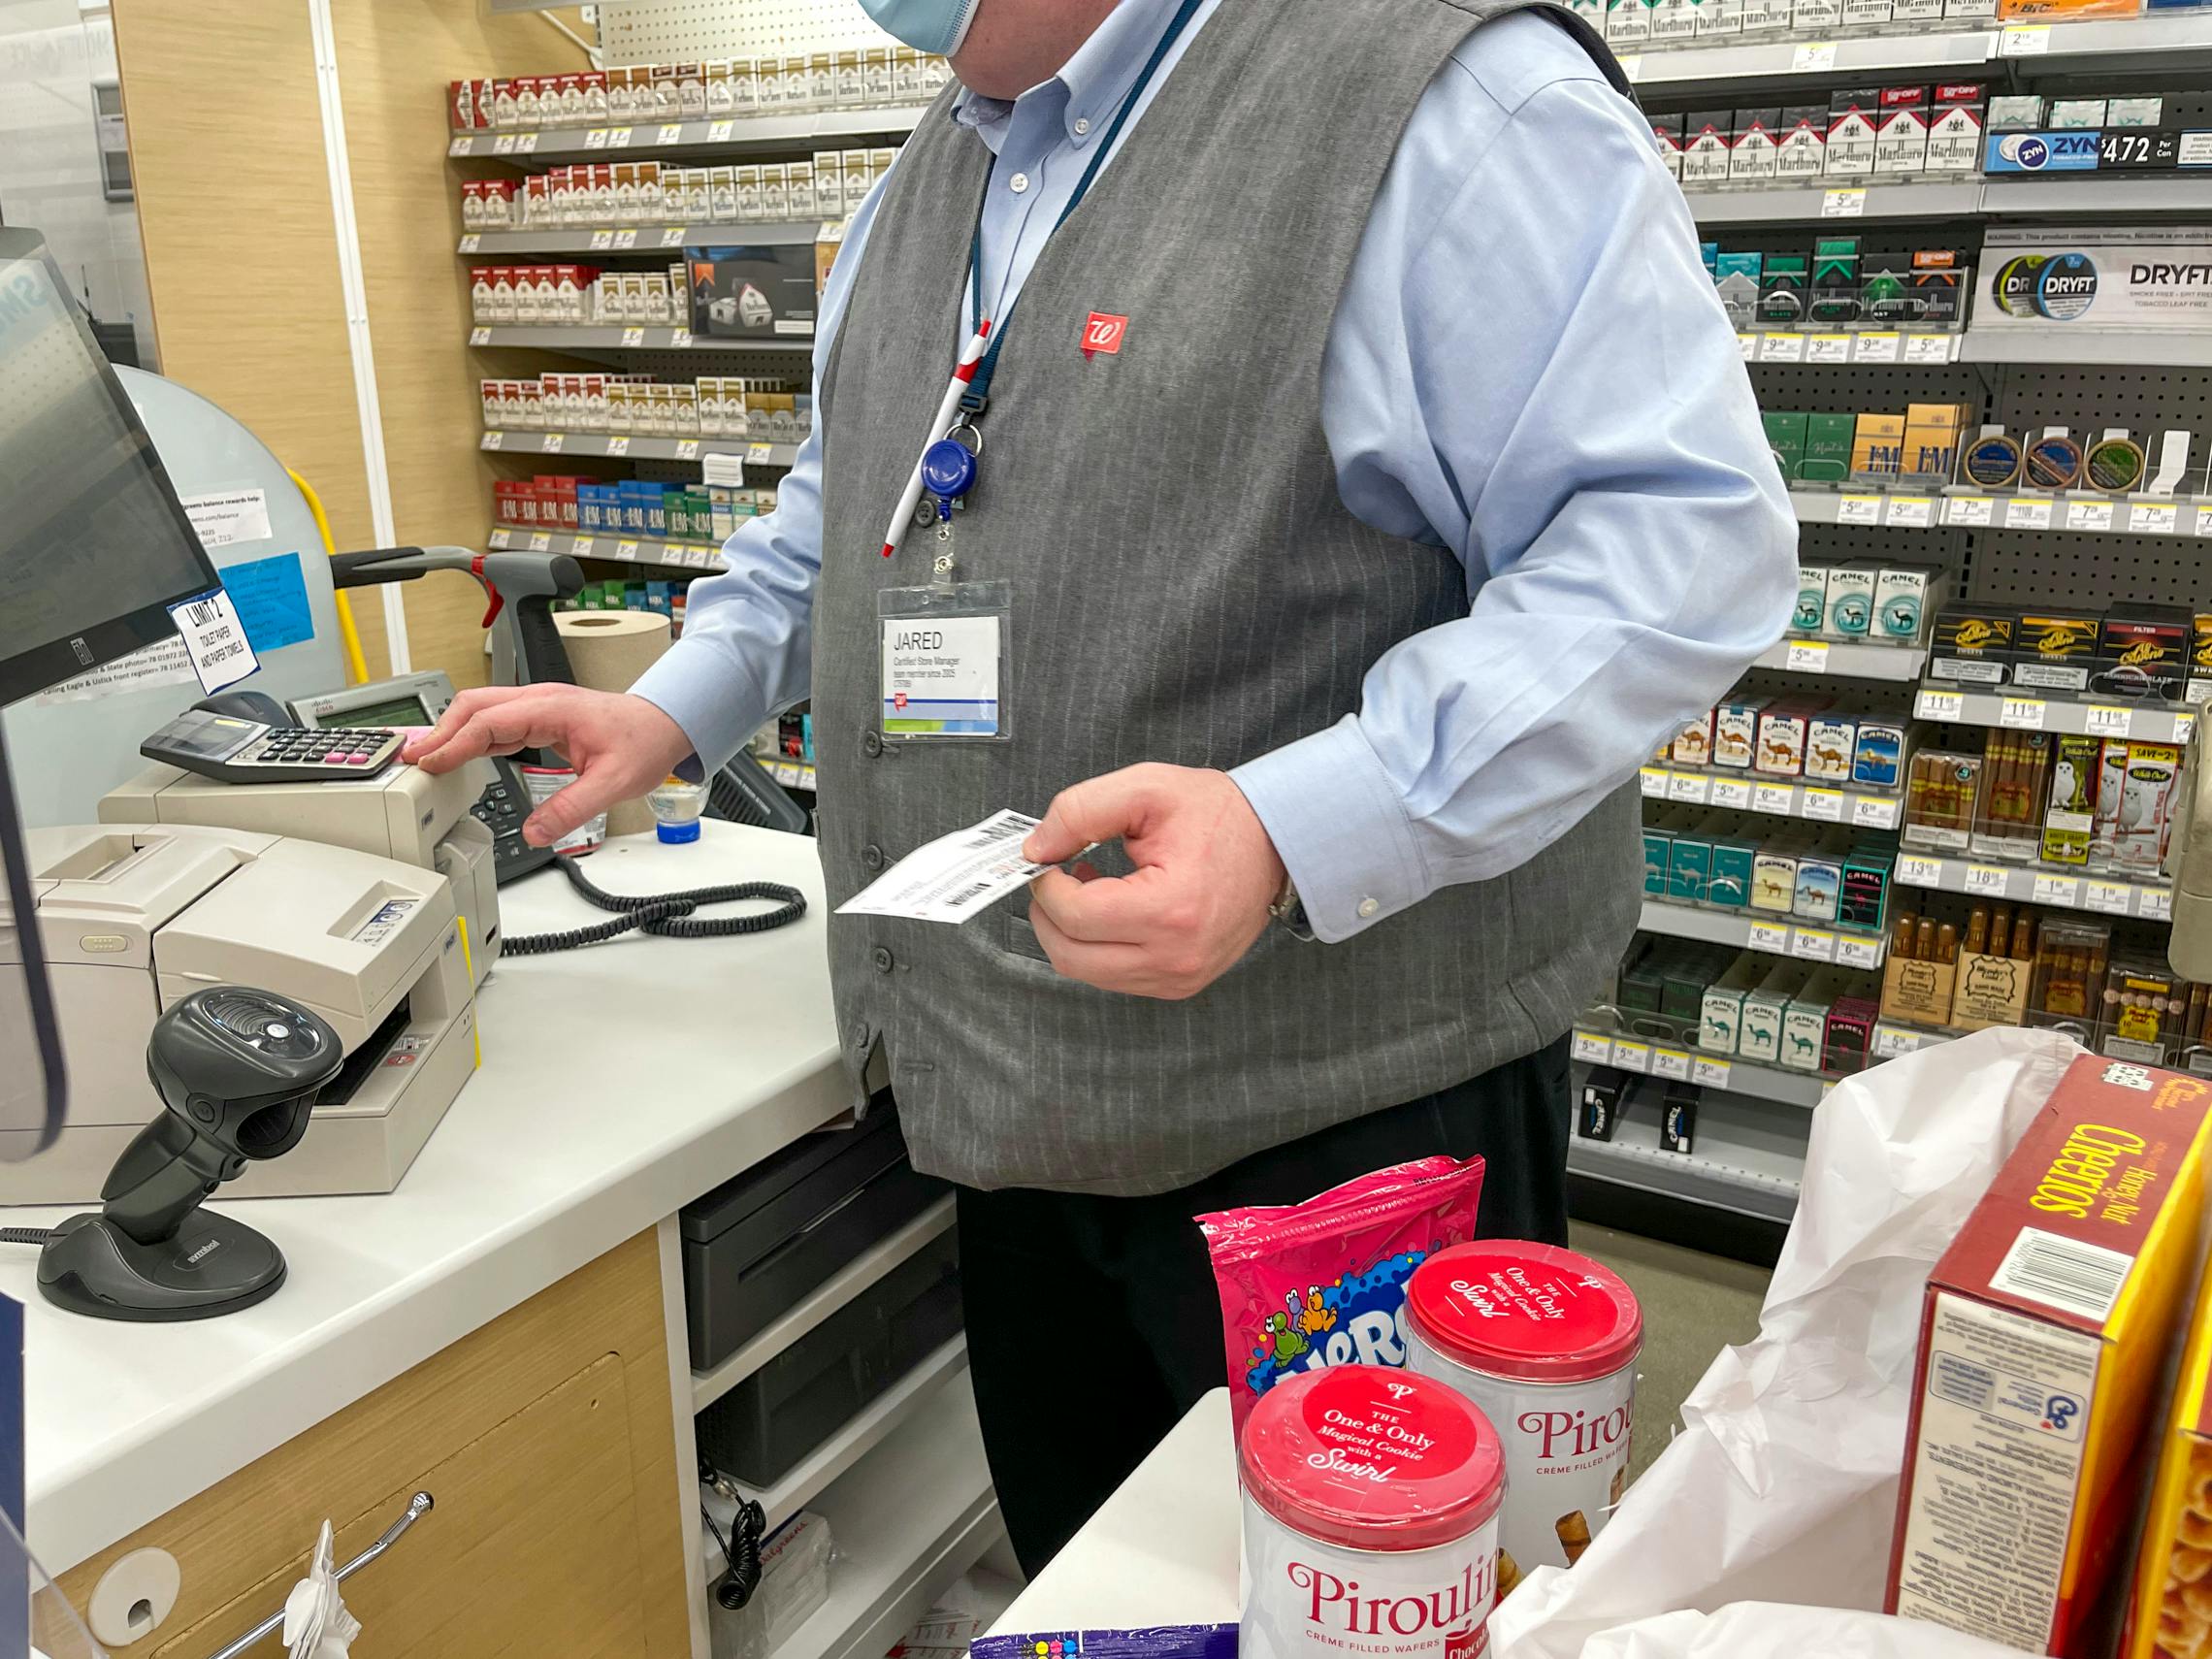 A Walgreens employee at checkout ringing up purchases.